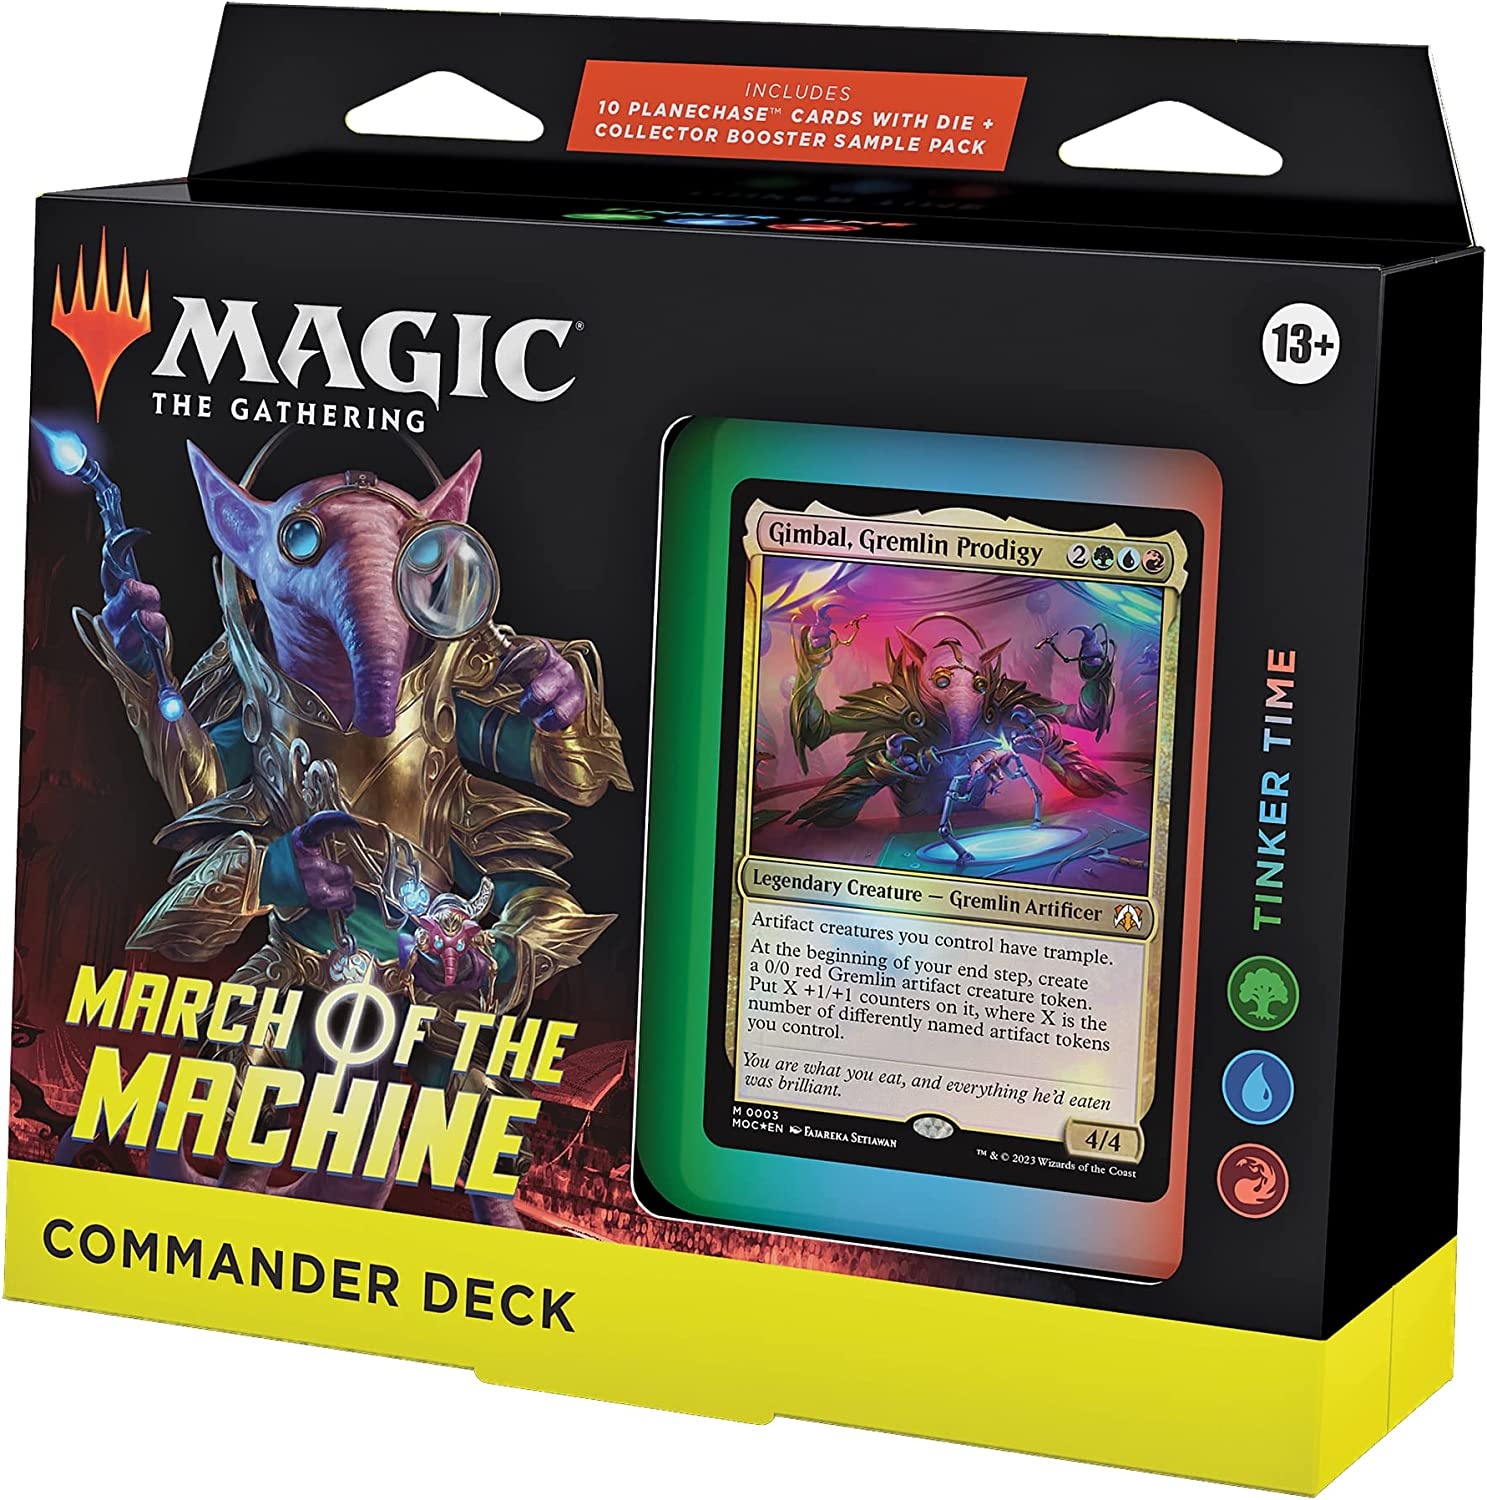 March of the Machine Draft Booster Pack - Star City Games